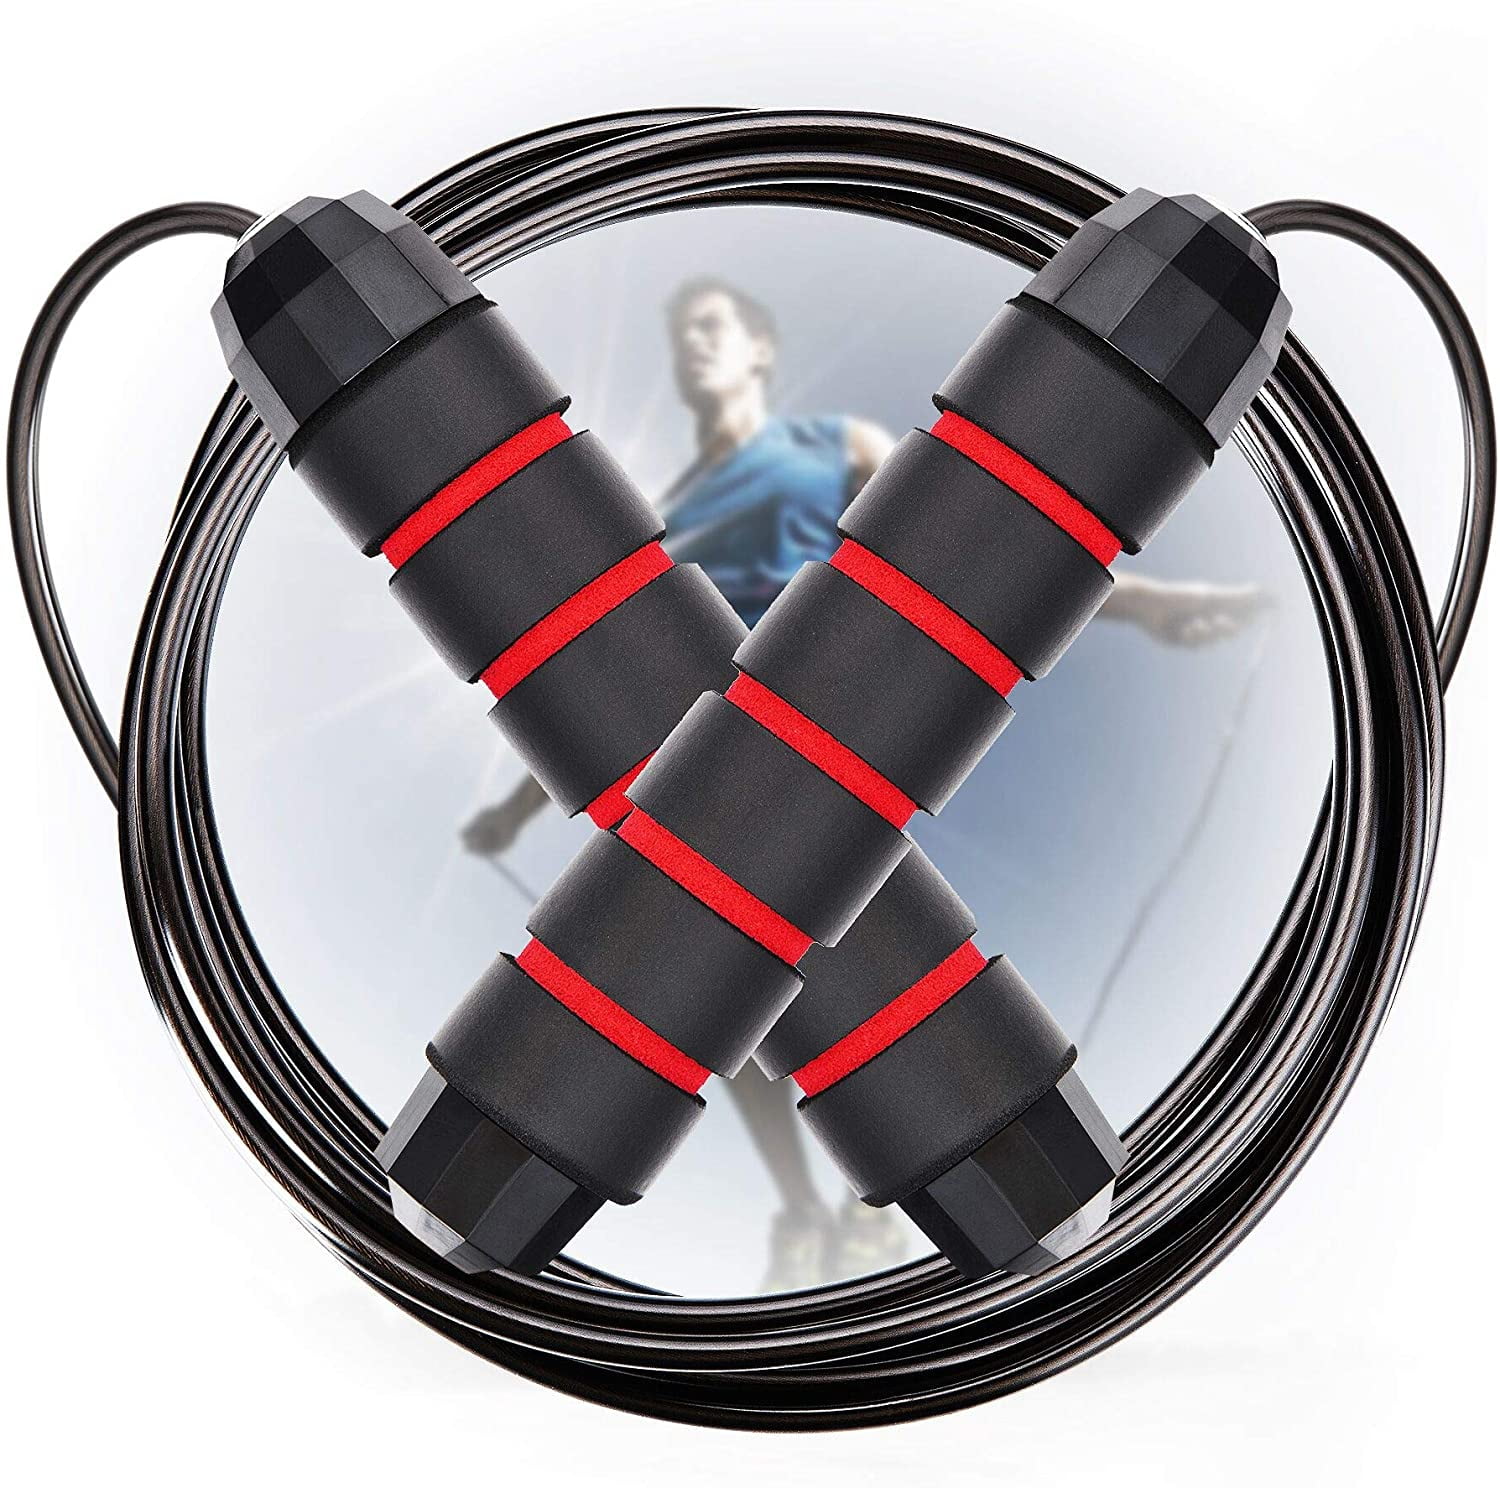 US!Home Sports Fitness Skipping Counting PVC Jump Rope Adjustable Bearing Speed